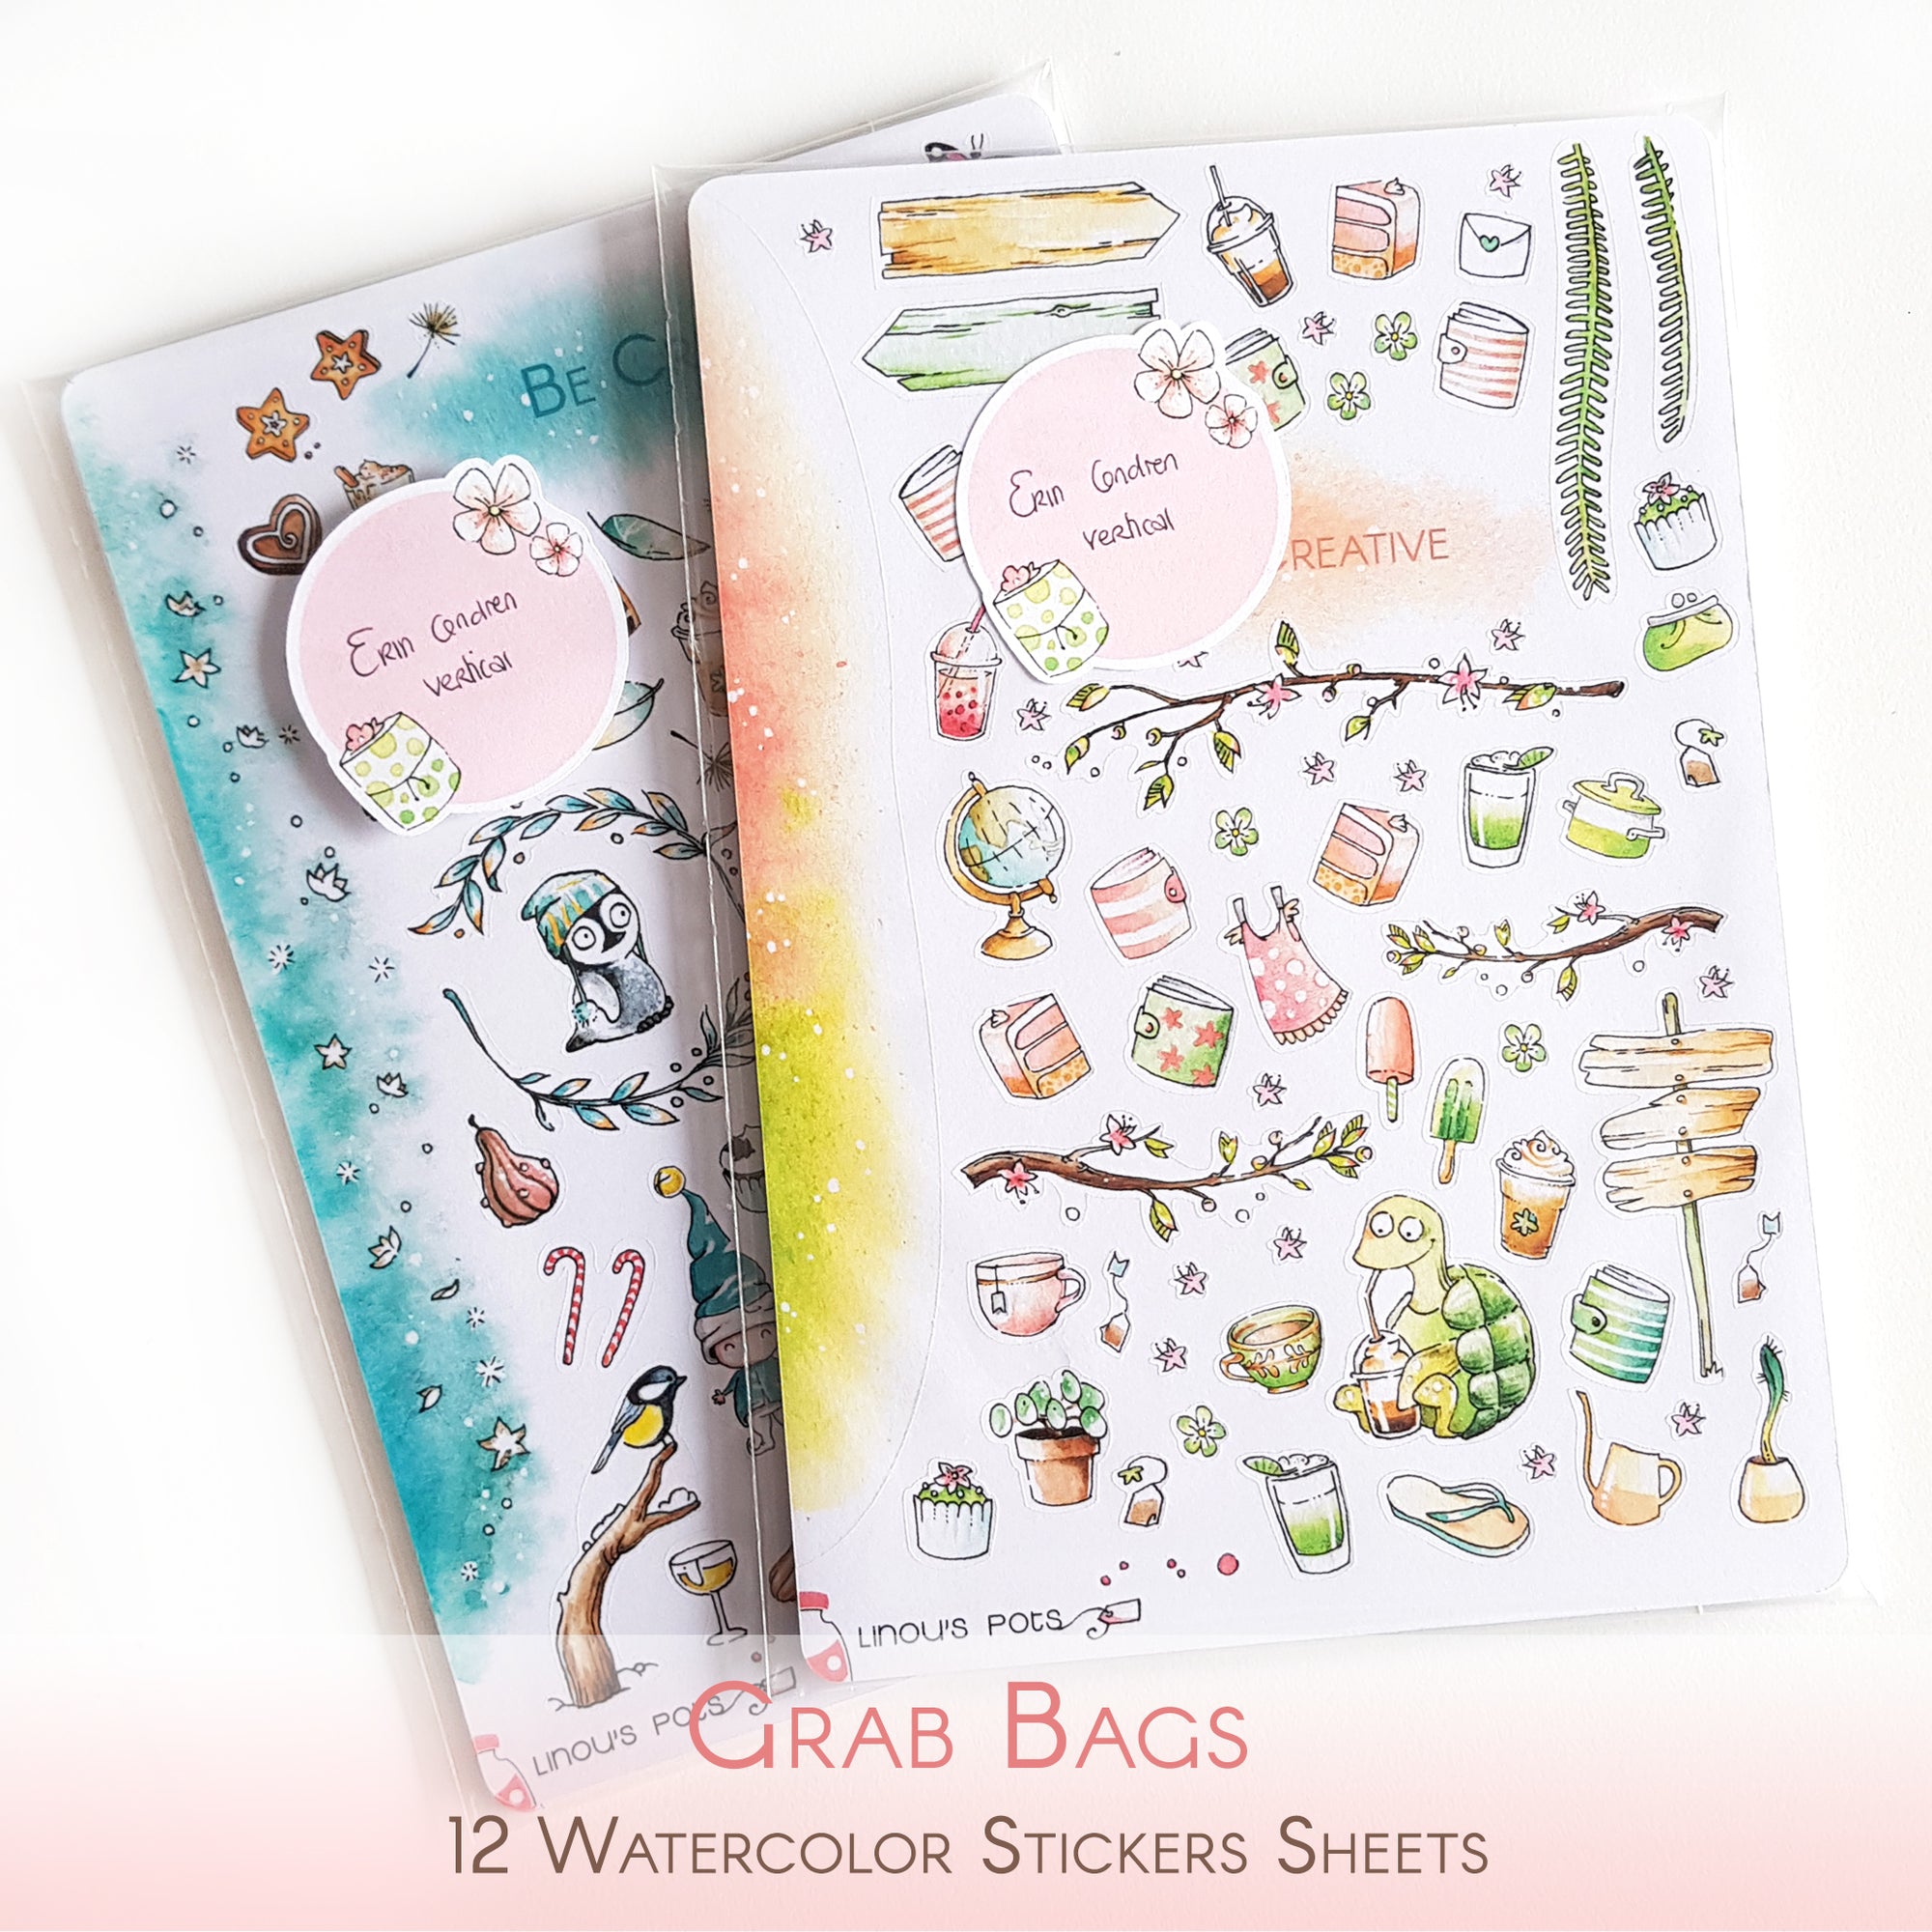 Grab Bags with 12 Mixed Stickers Sheets